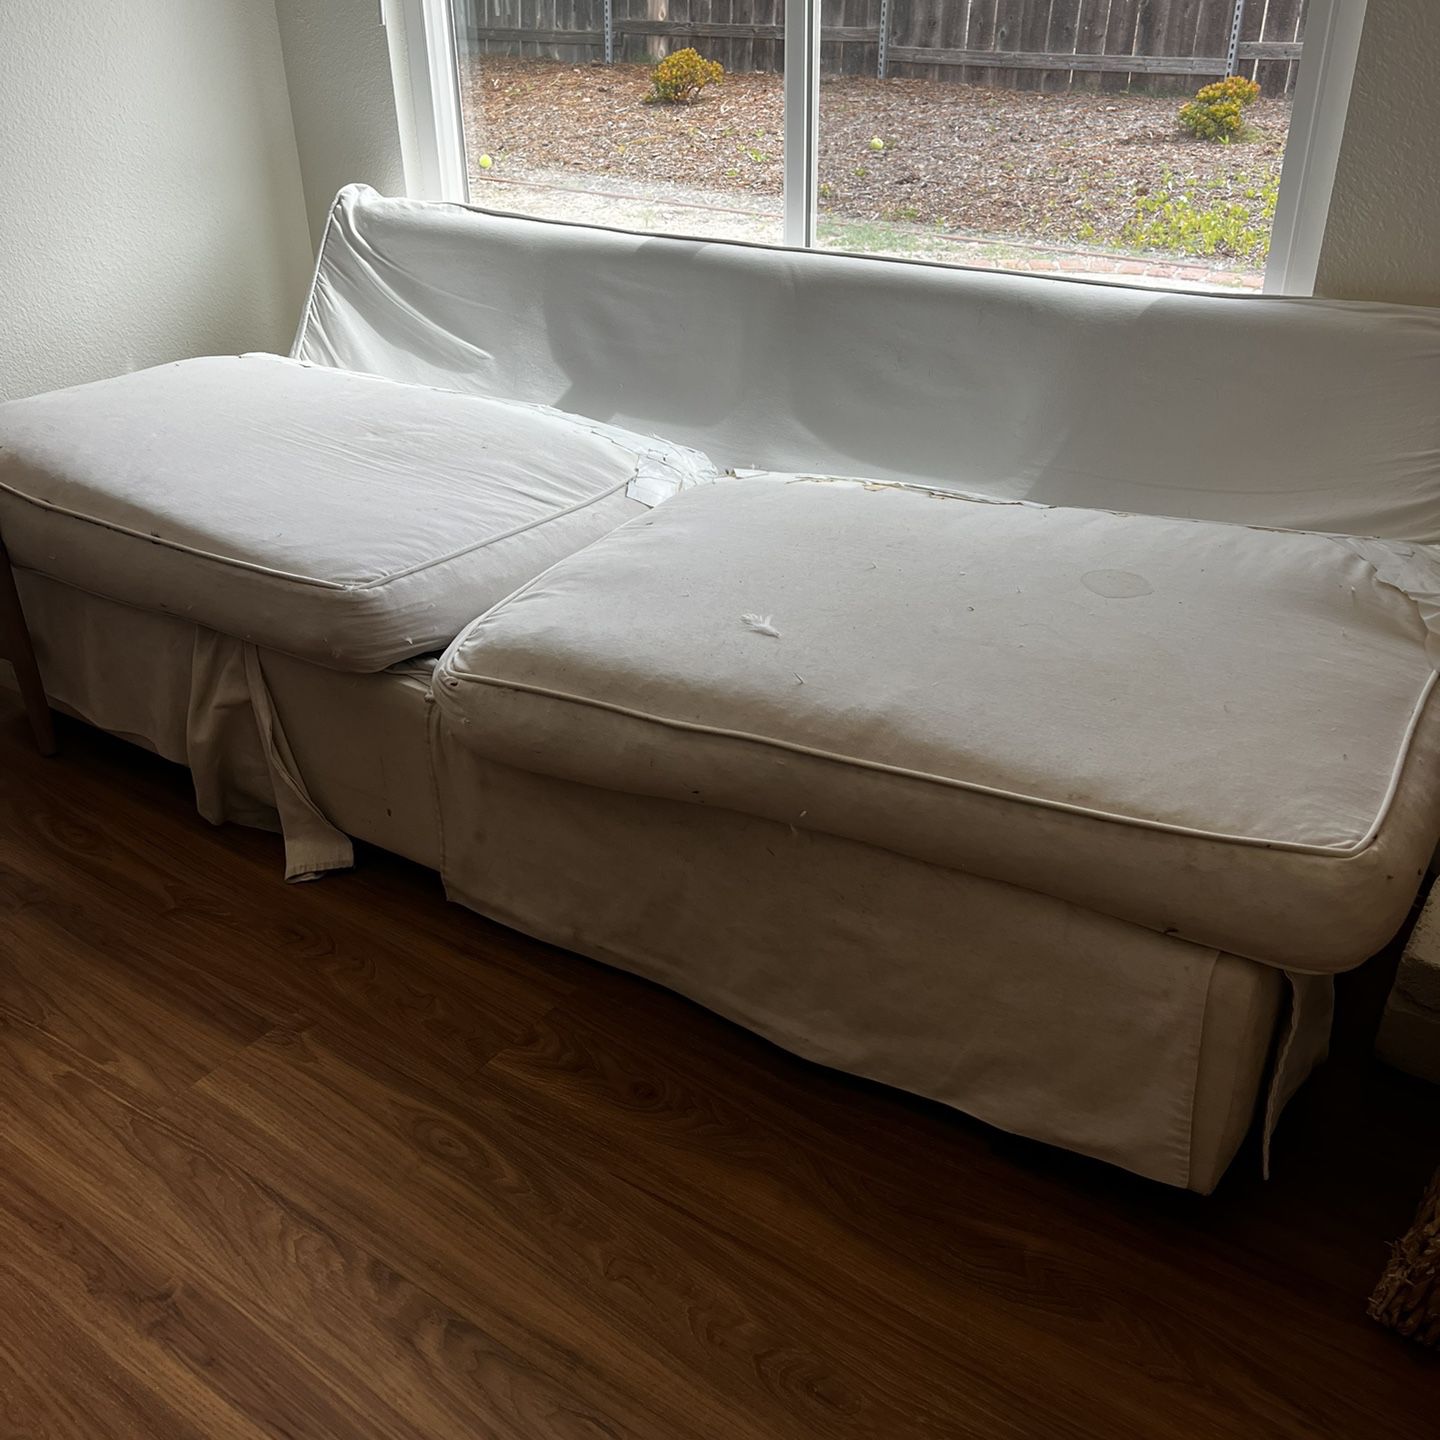 FREE - Down Feather Slipcover Sofa (No back pillows, needs reupholster)